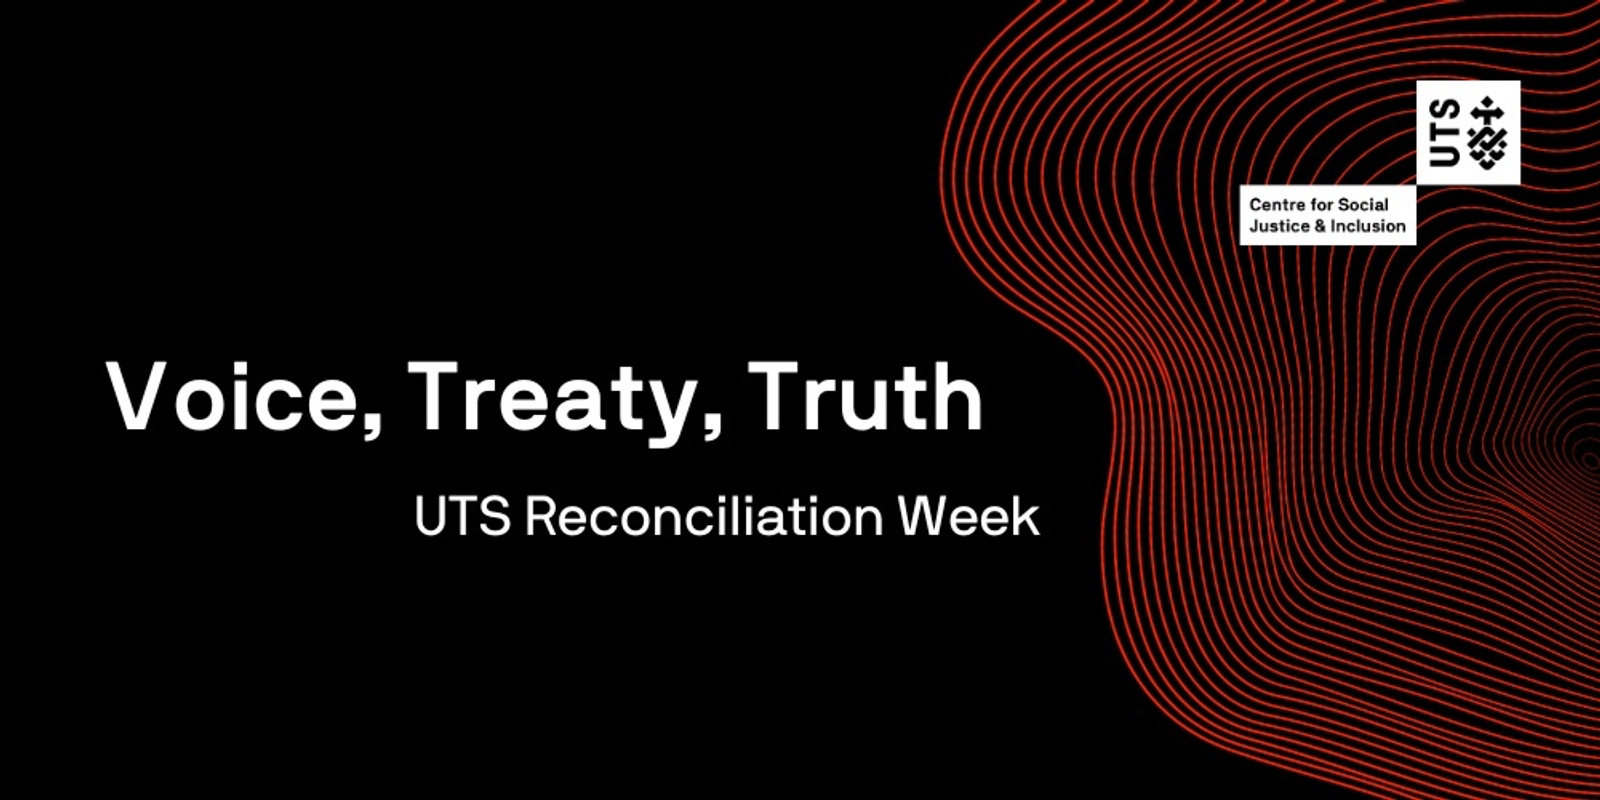 Voice, Treaty, Truth - UTS Reconciliation Week